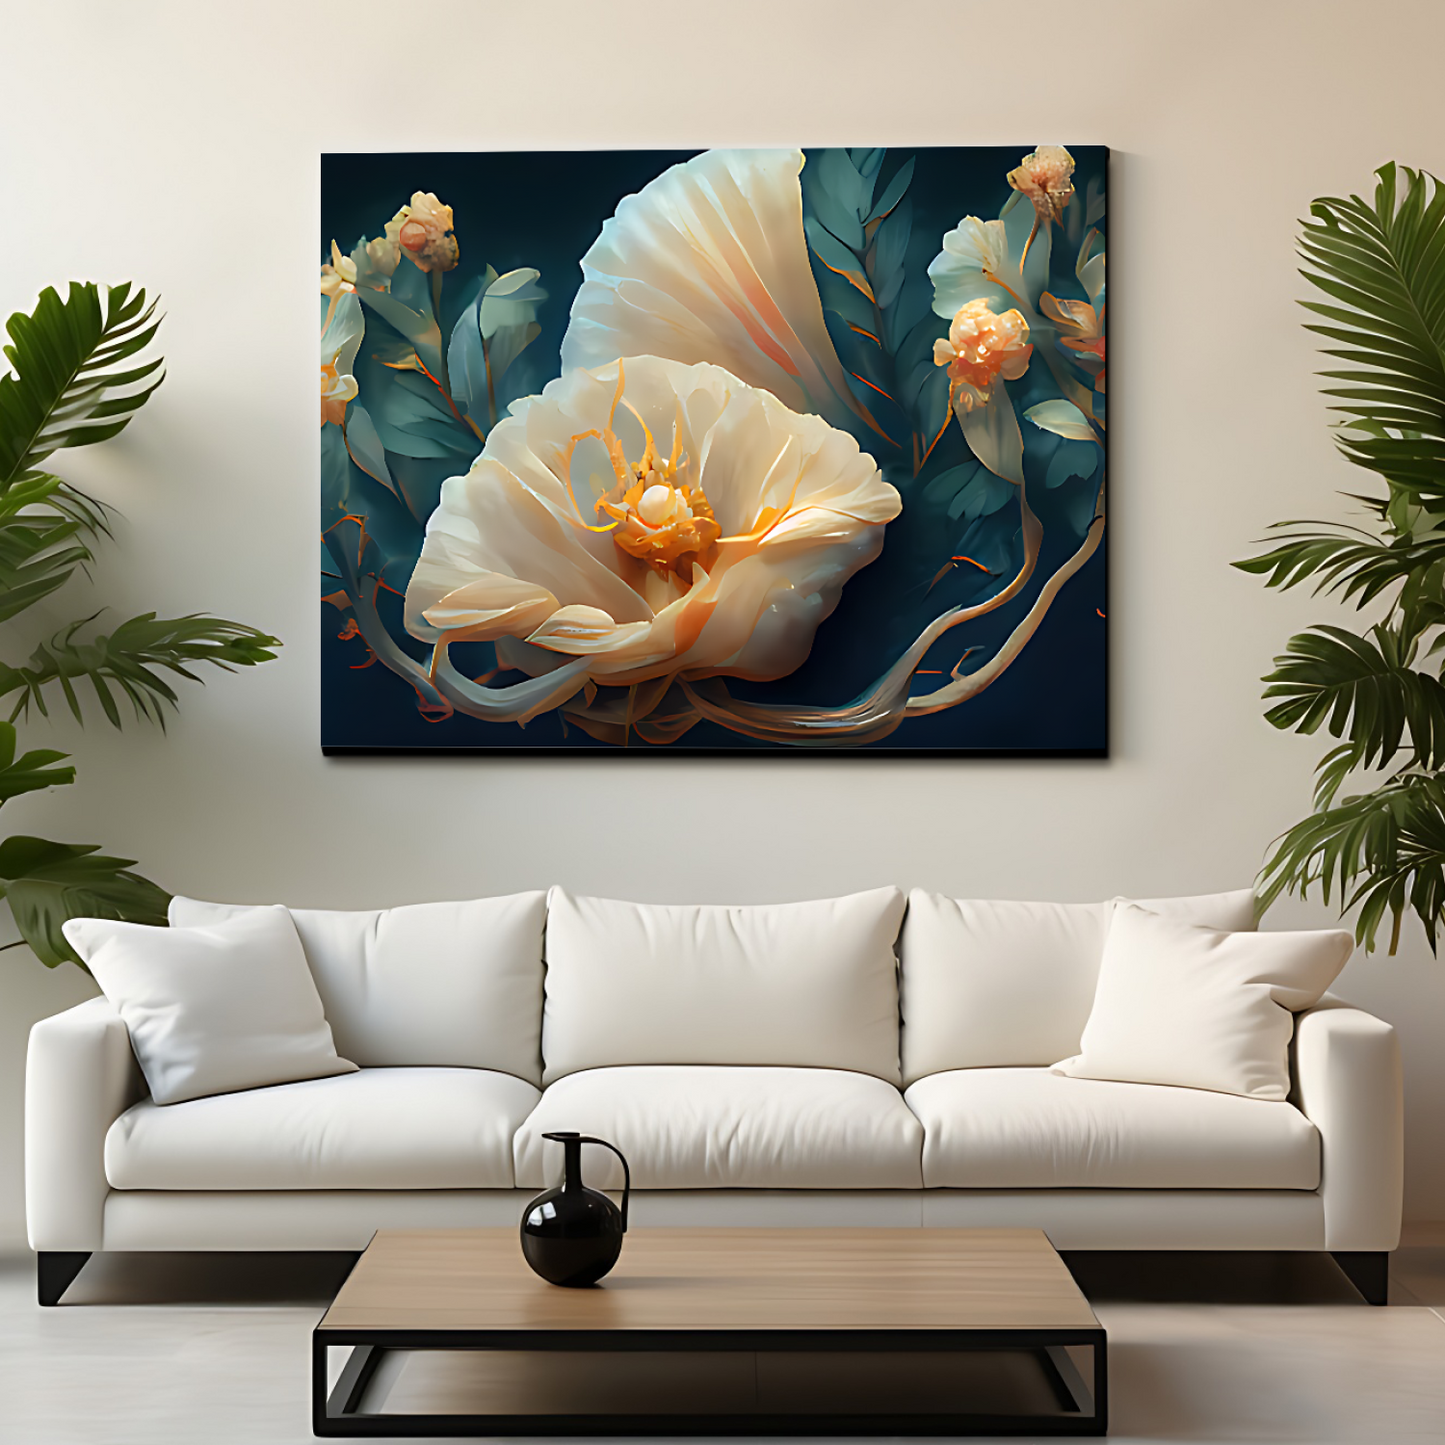 3D White Flowers Luxury Wall Painting